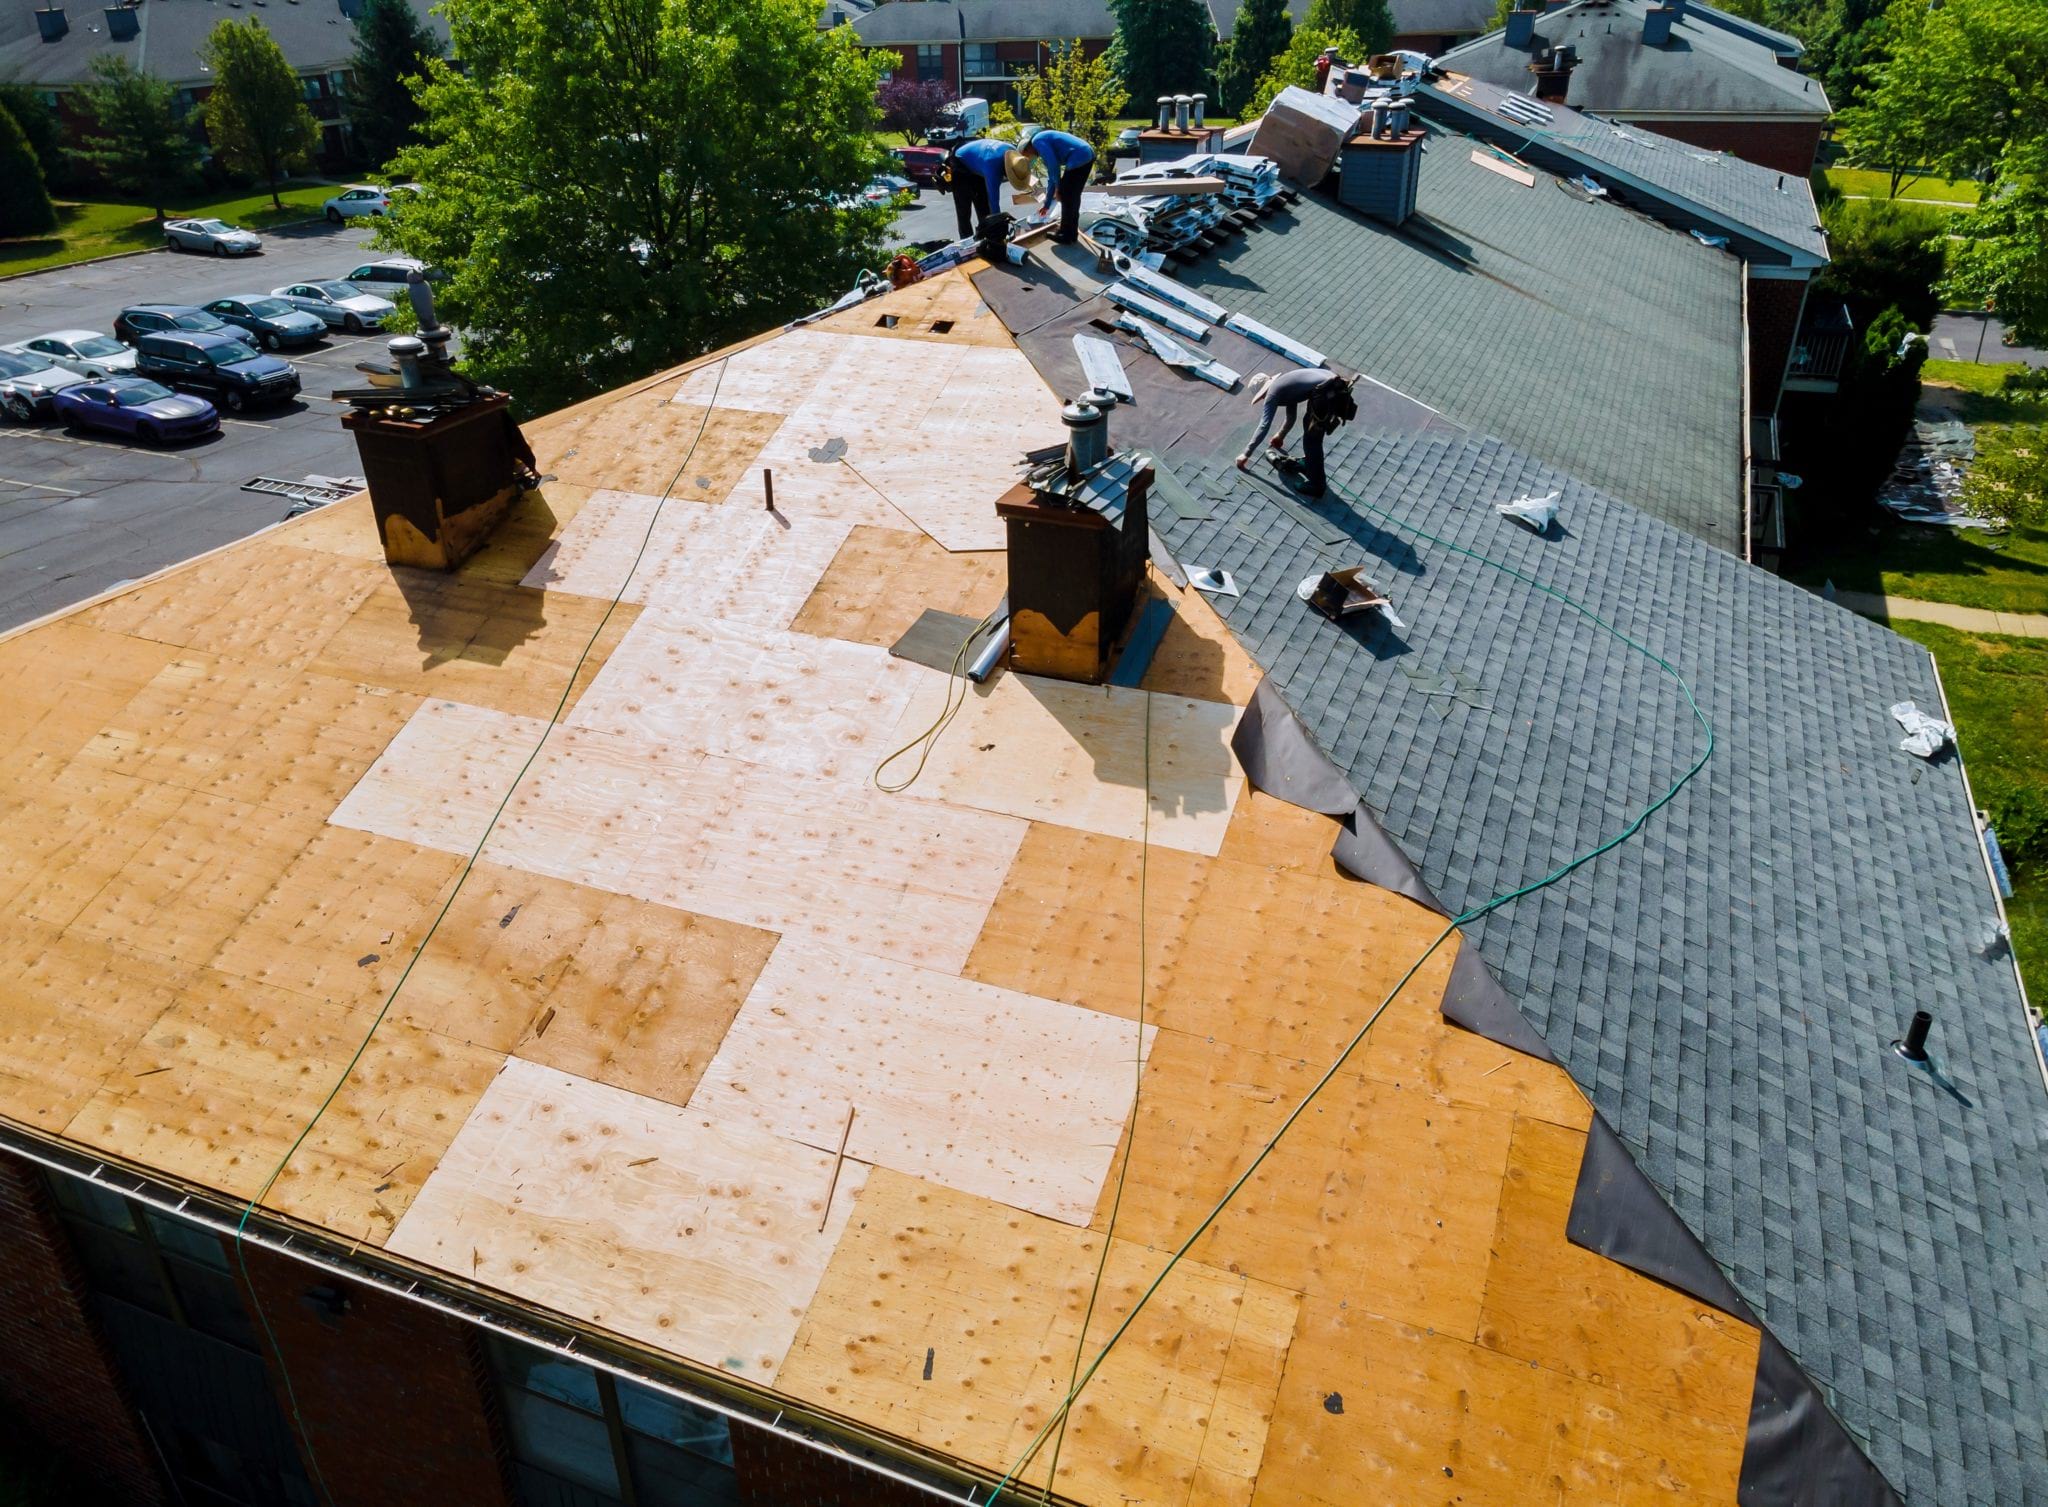 Workers repairing an asphalt shingled roof. Half the roof has been stripped down to the plywood.